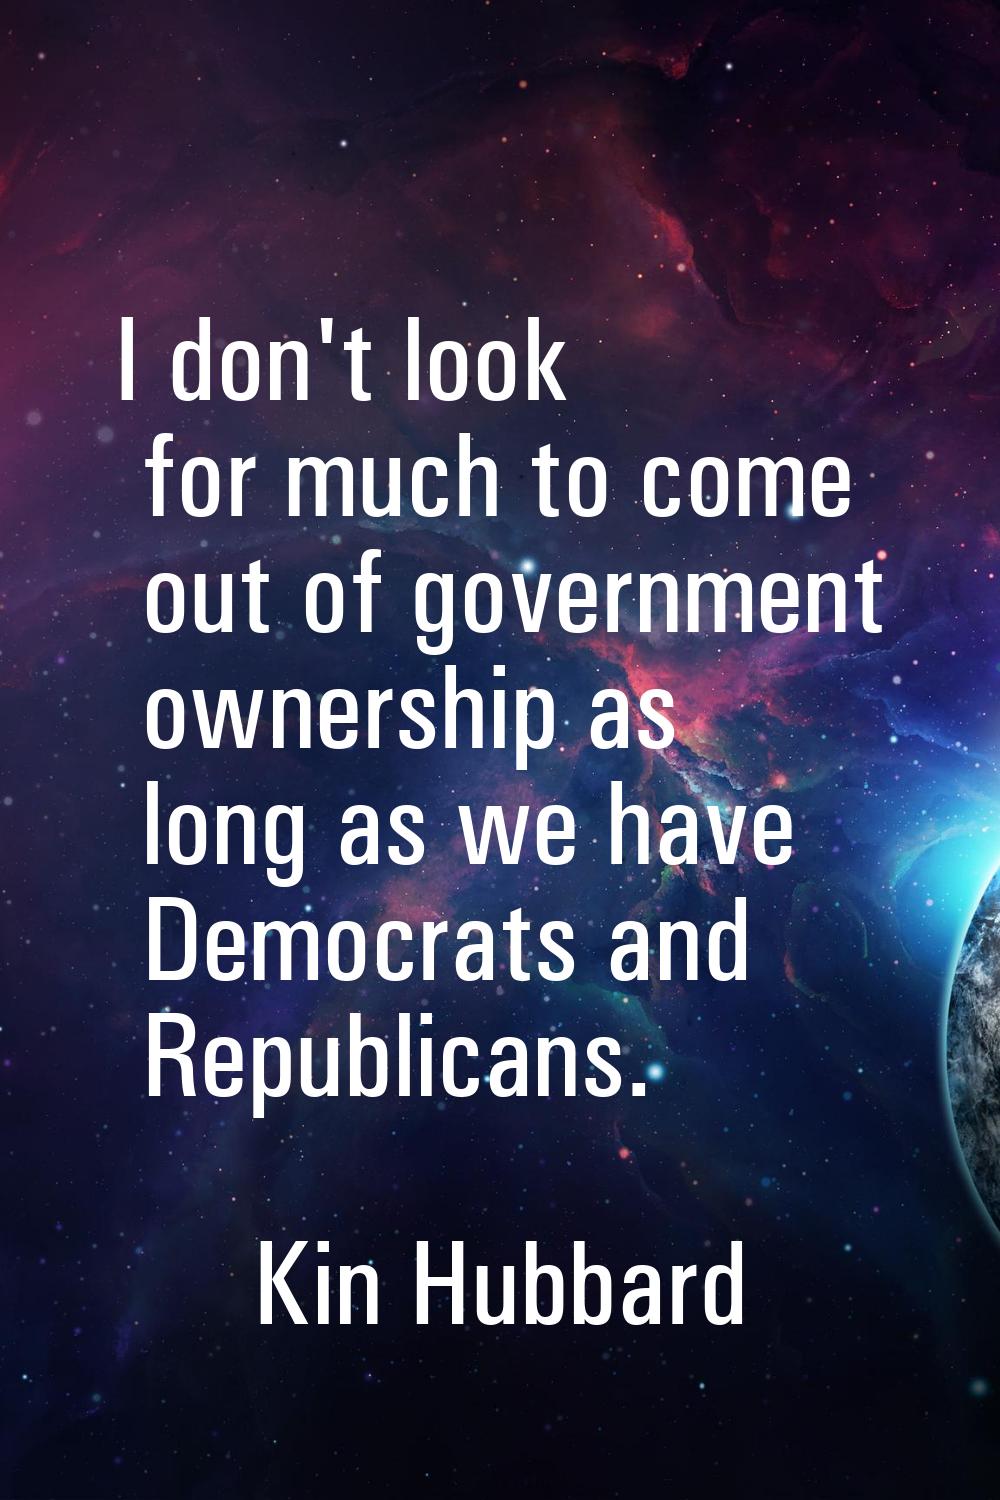 I don't look for much to come out of government ownership as long as we have Democrats and Republic